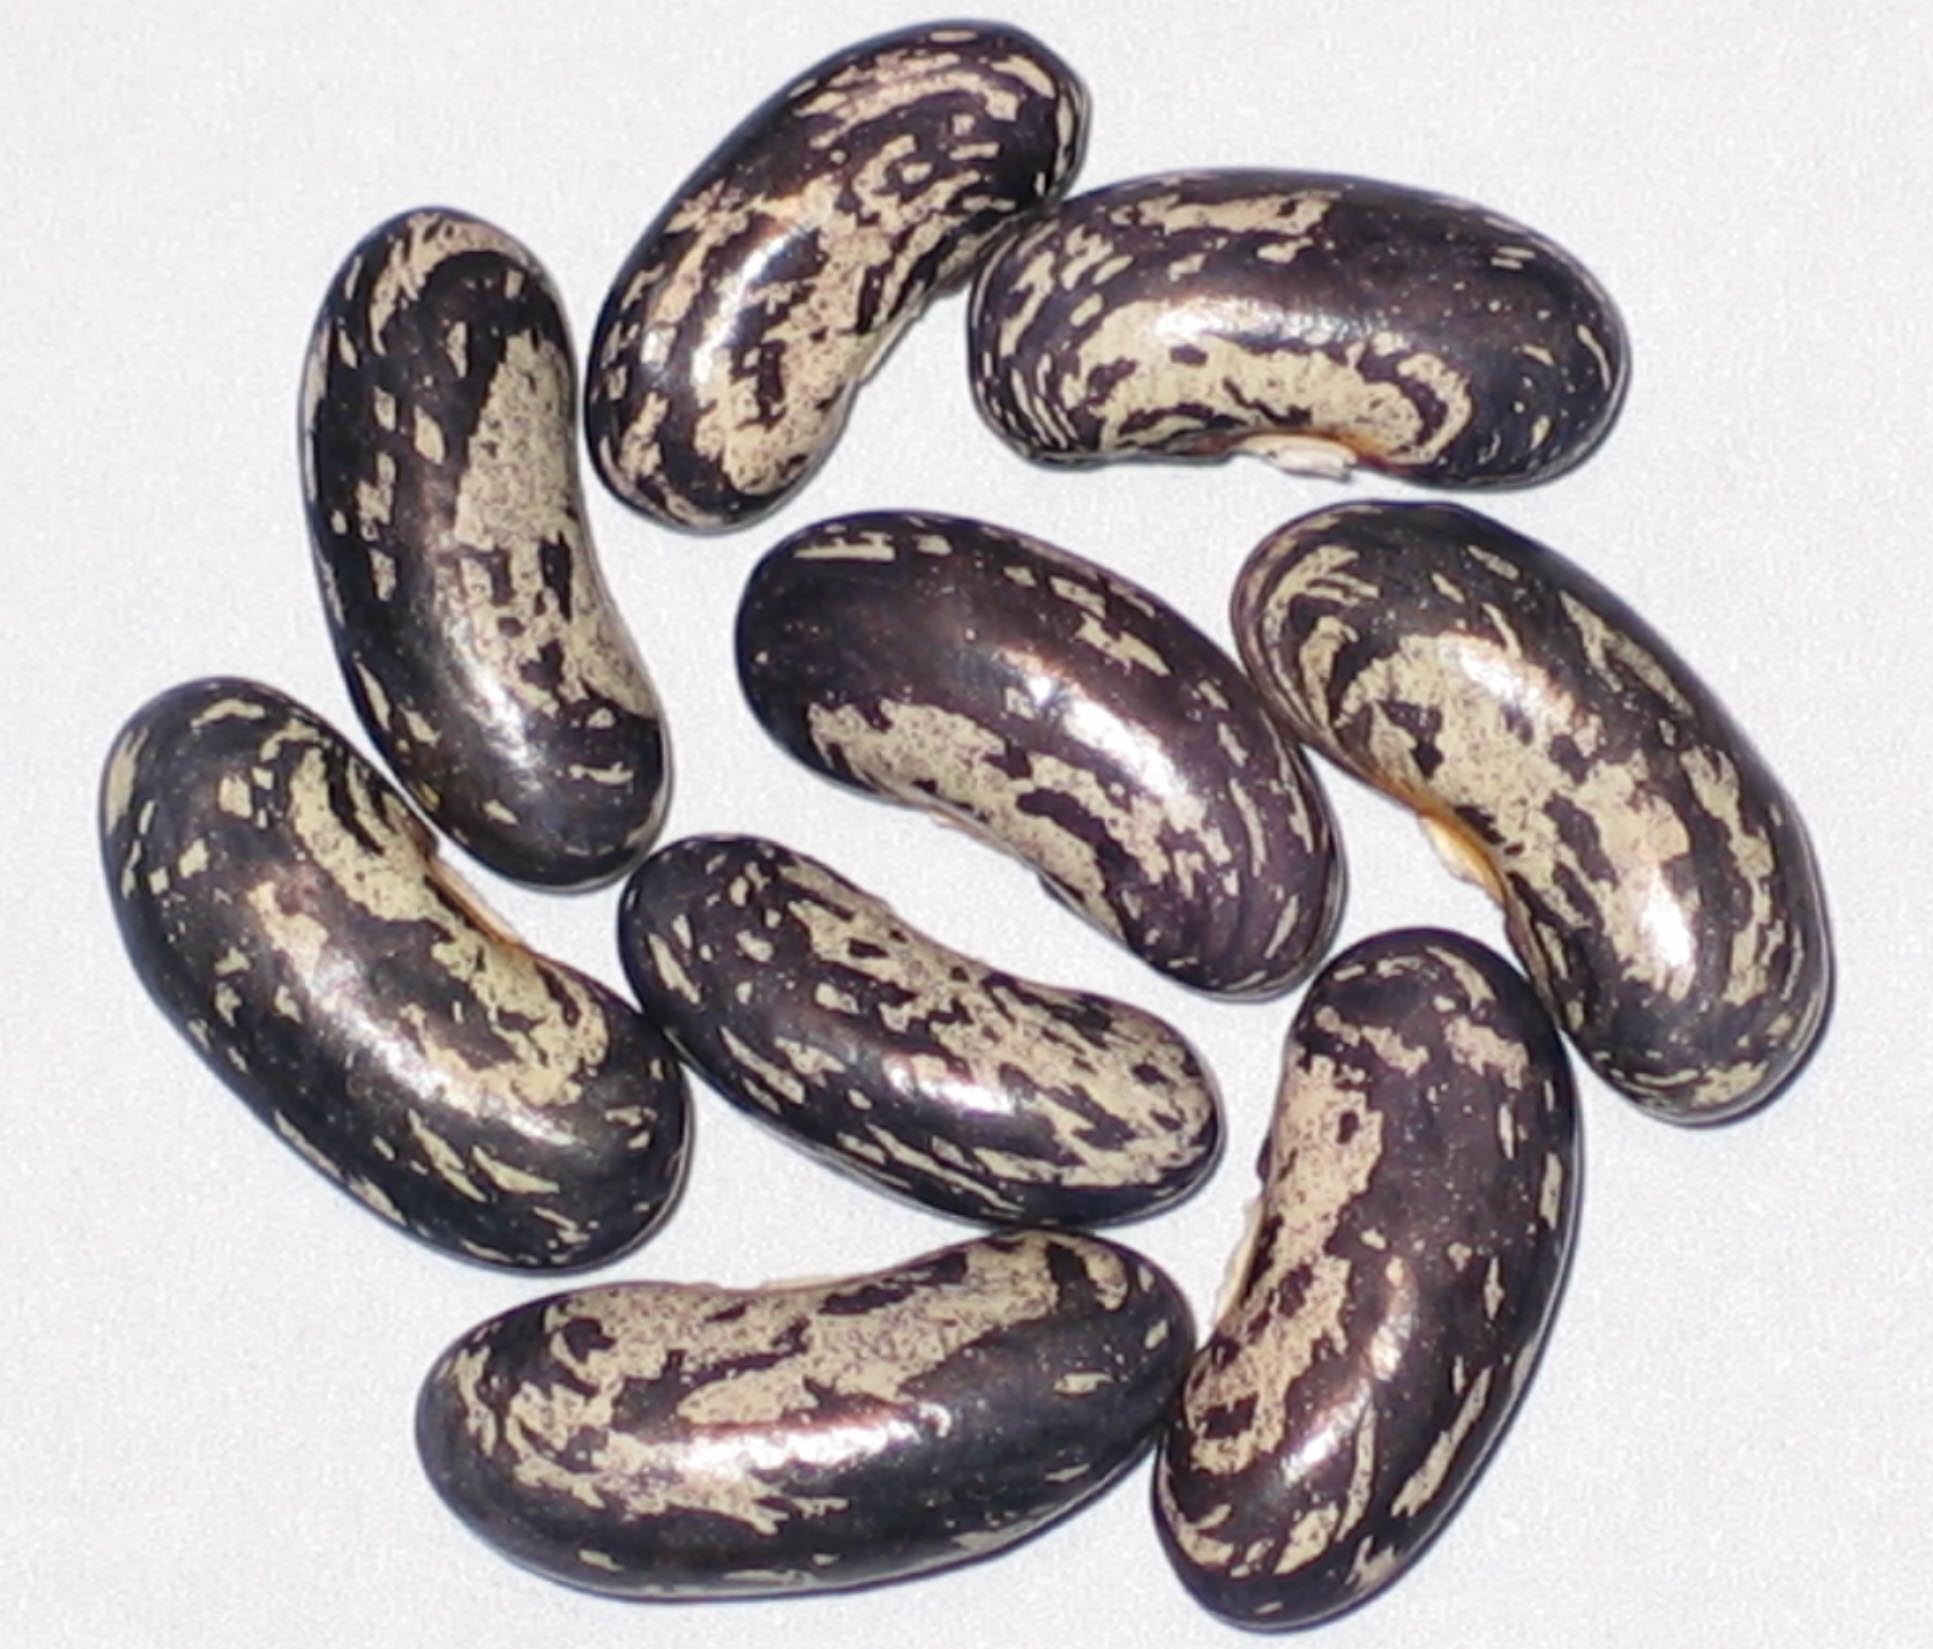 image of Blue Jay beans